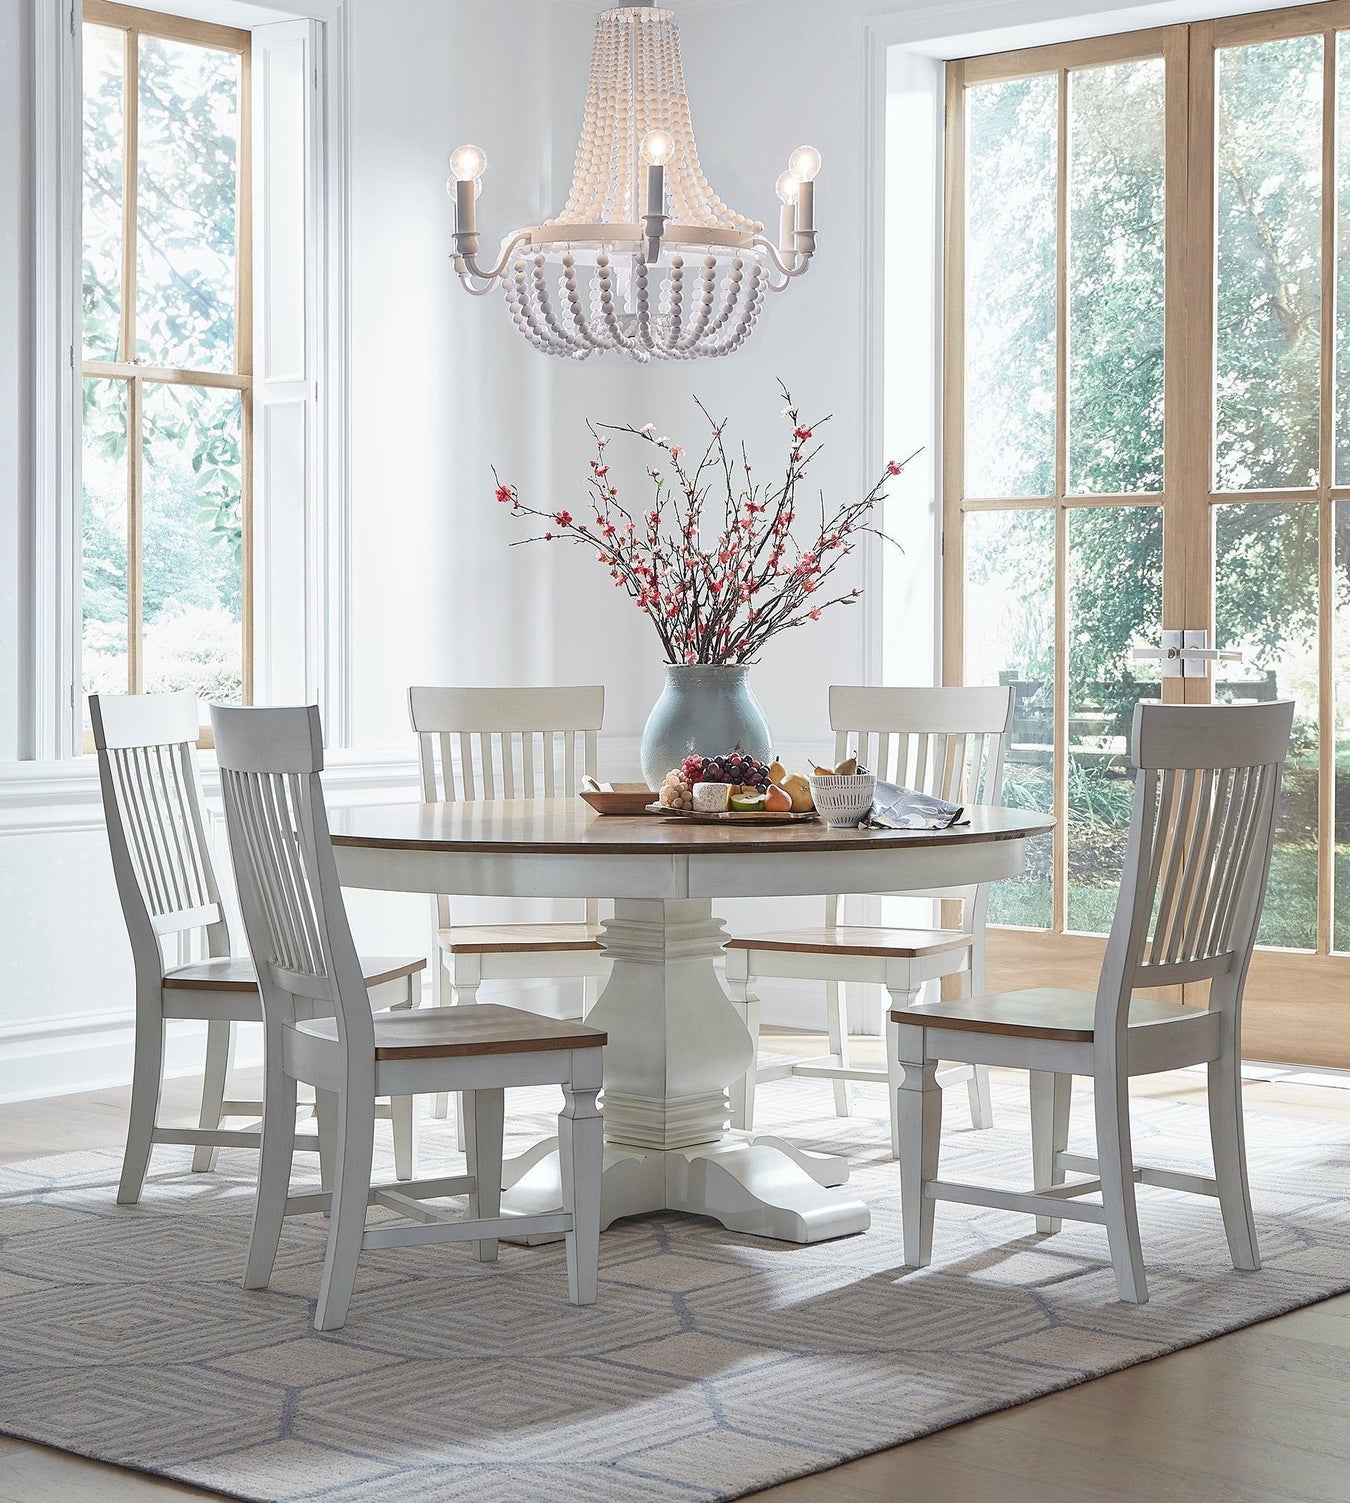 Banks Round Top Dining Collection